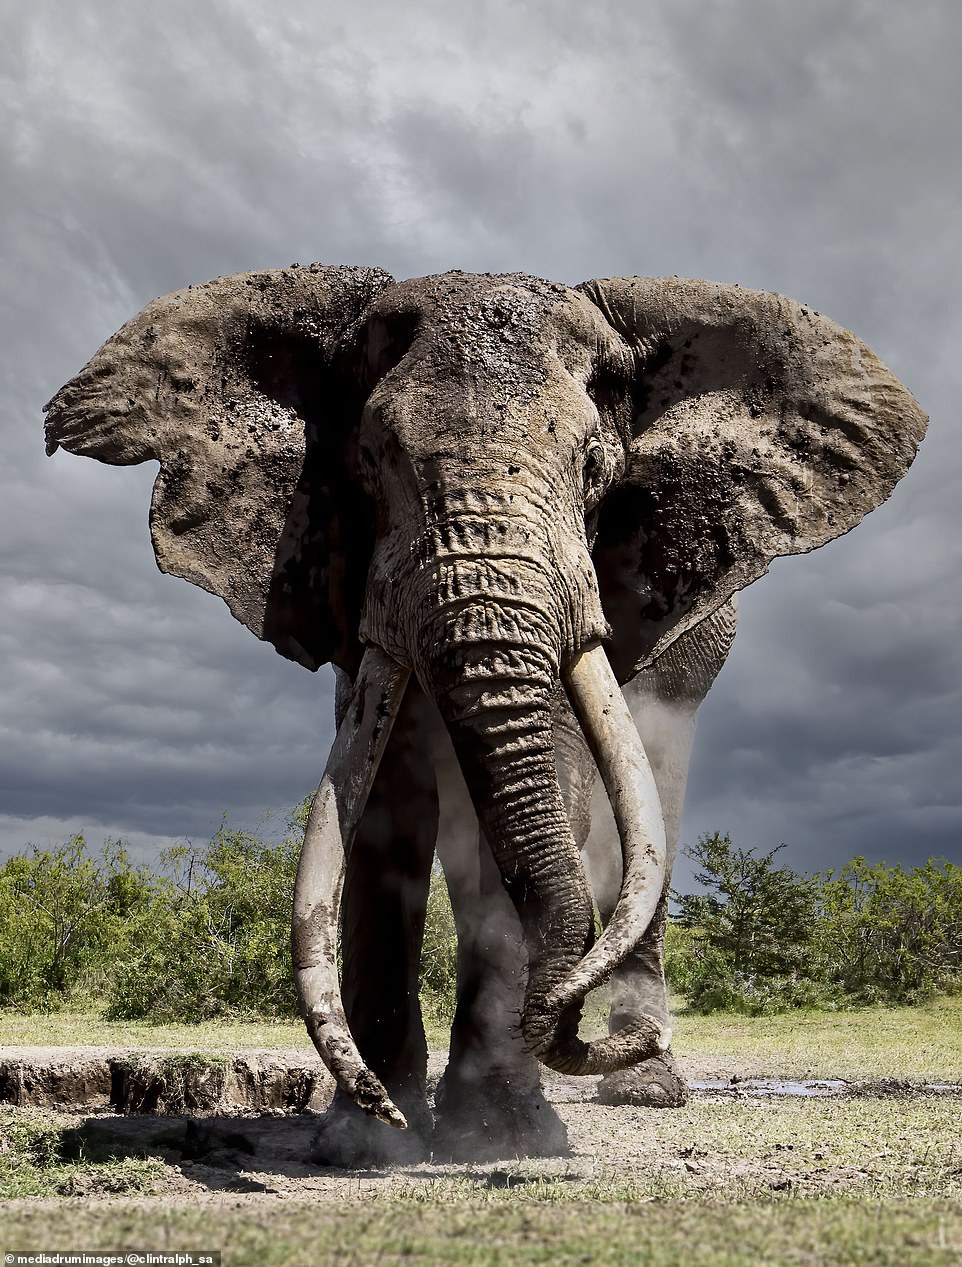 The elephant population in Amboseli National Park is one of the few that has been able to live a relatively undisturbed existence in natural conditions